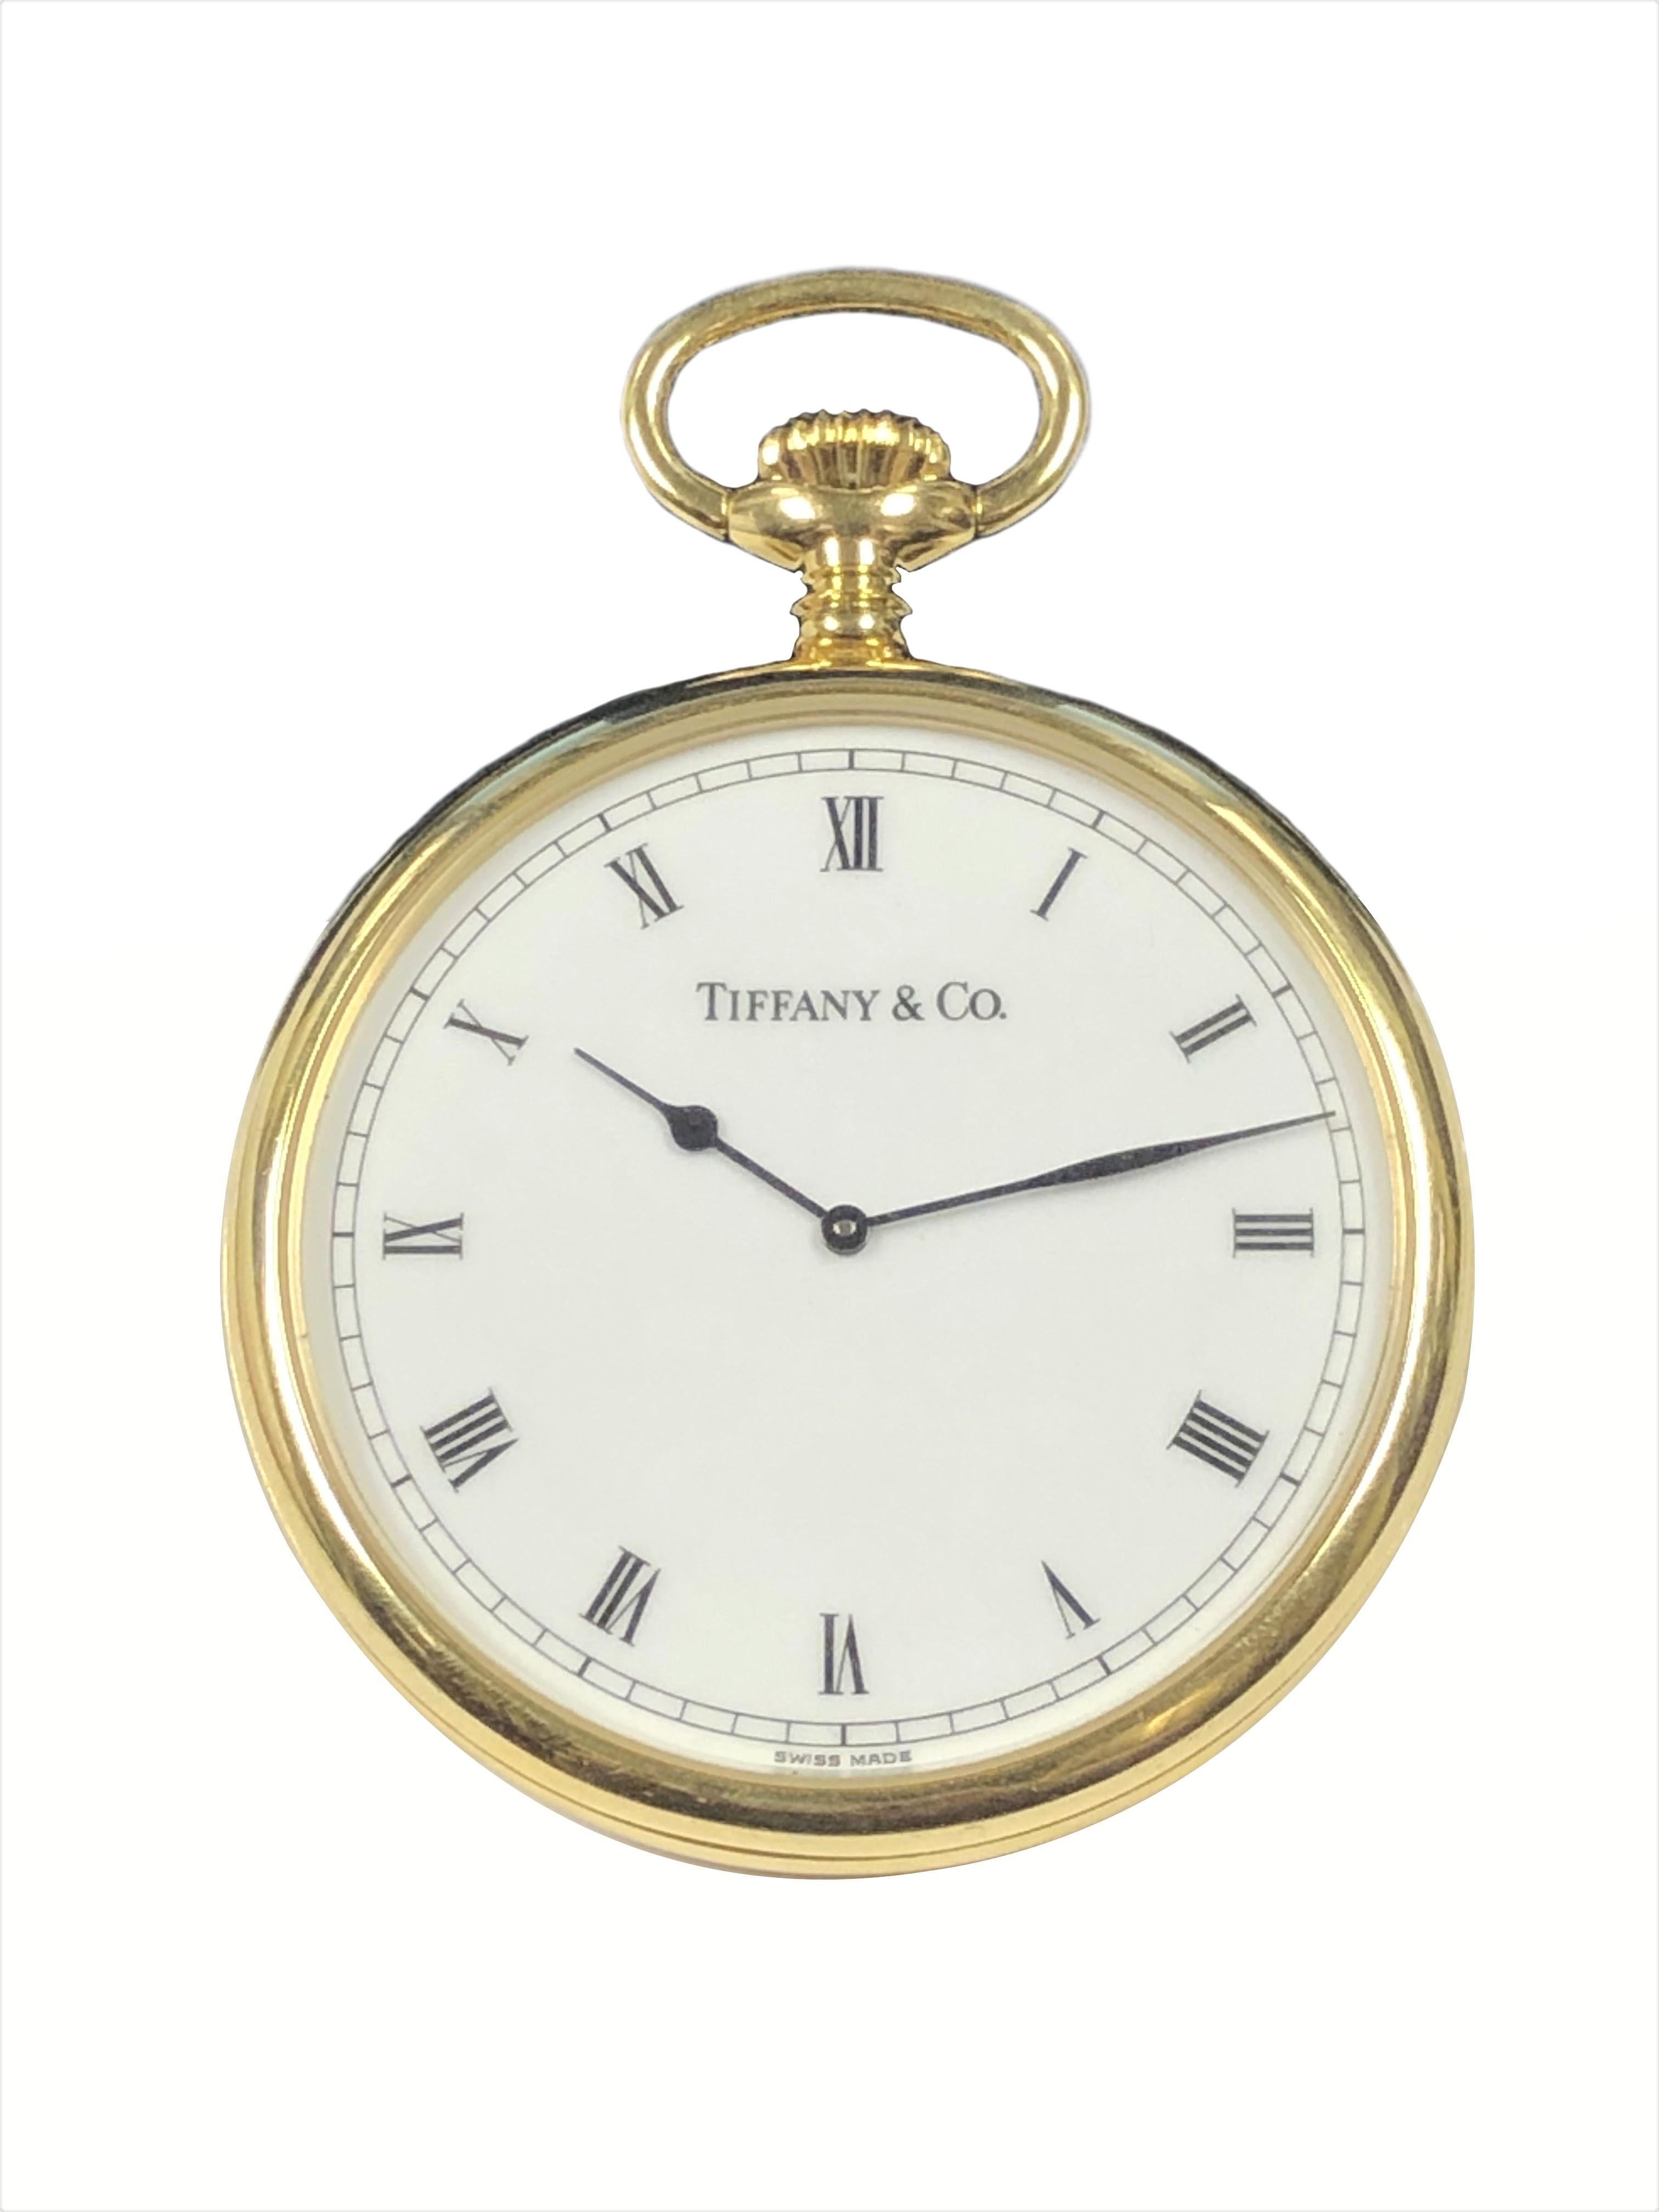 Circa 1990s Tiffany & Company presentation Pocket Watch, 49 M.M. X 7 M.M. thick 18K Yellow Gold 3 piece case, quartz Movement, White Dial with Black Roman Numerals, the back of the watch is specially custom engraved with the Crest of Cambridge